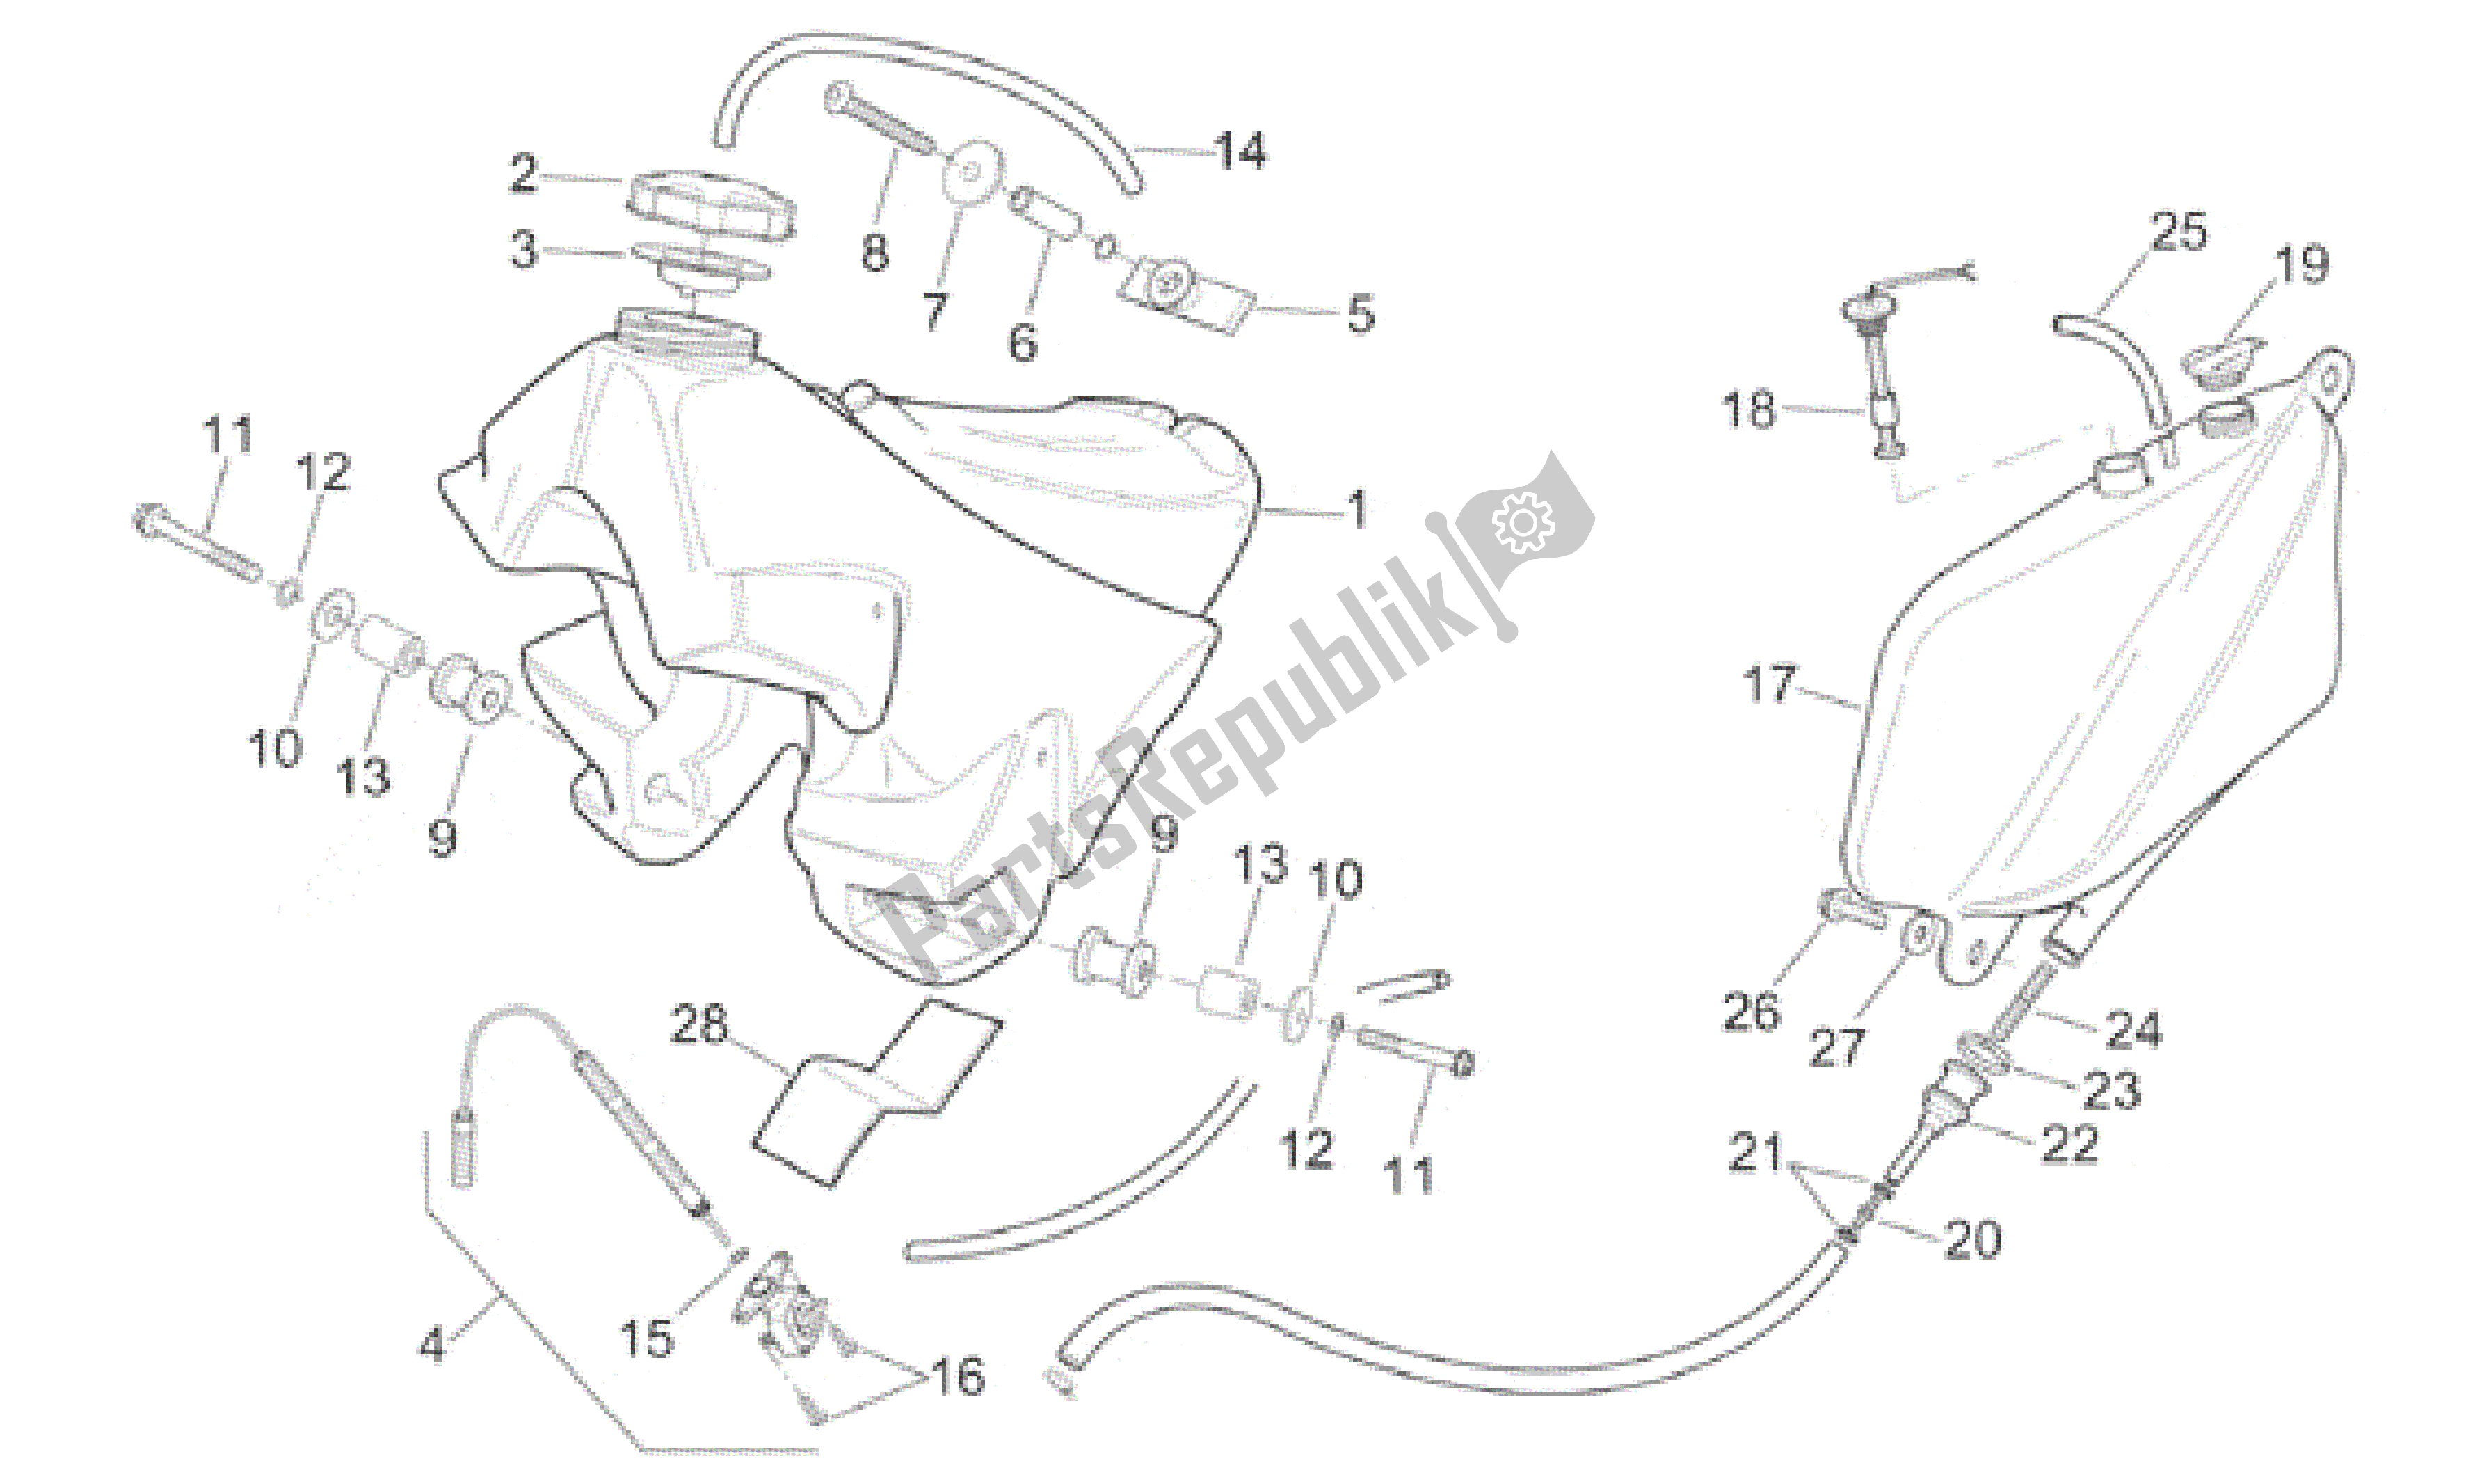 All parts for the Oil And Fuel Tank of the Aprilia ETX 125 1999 - 2001